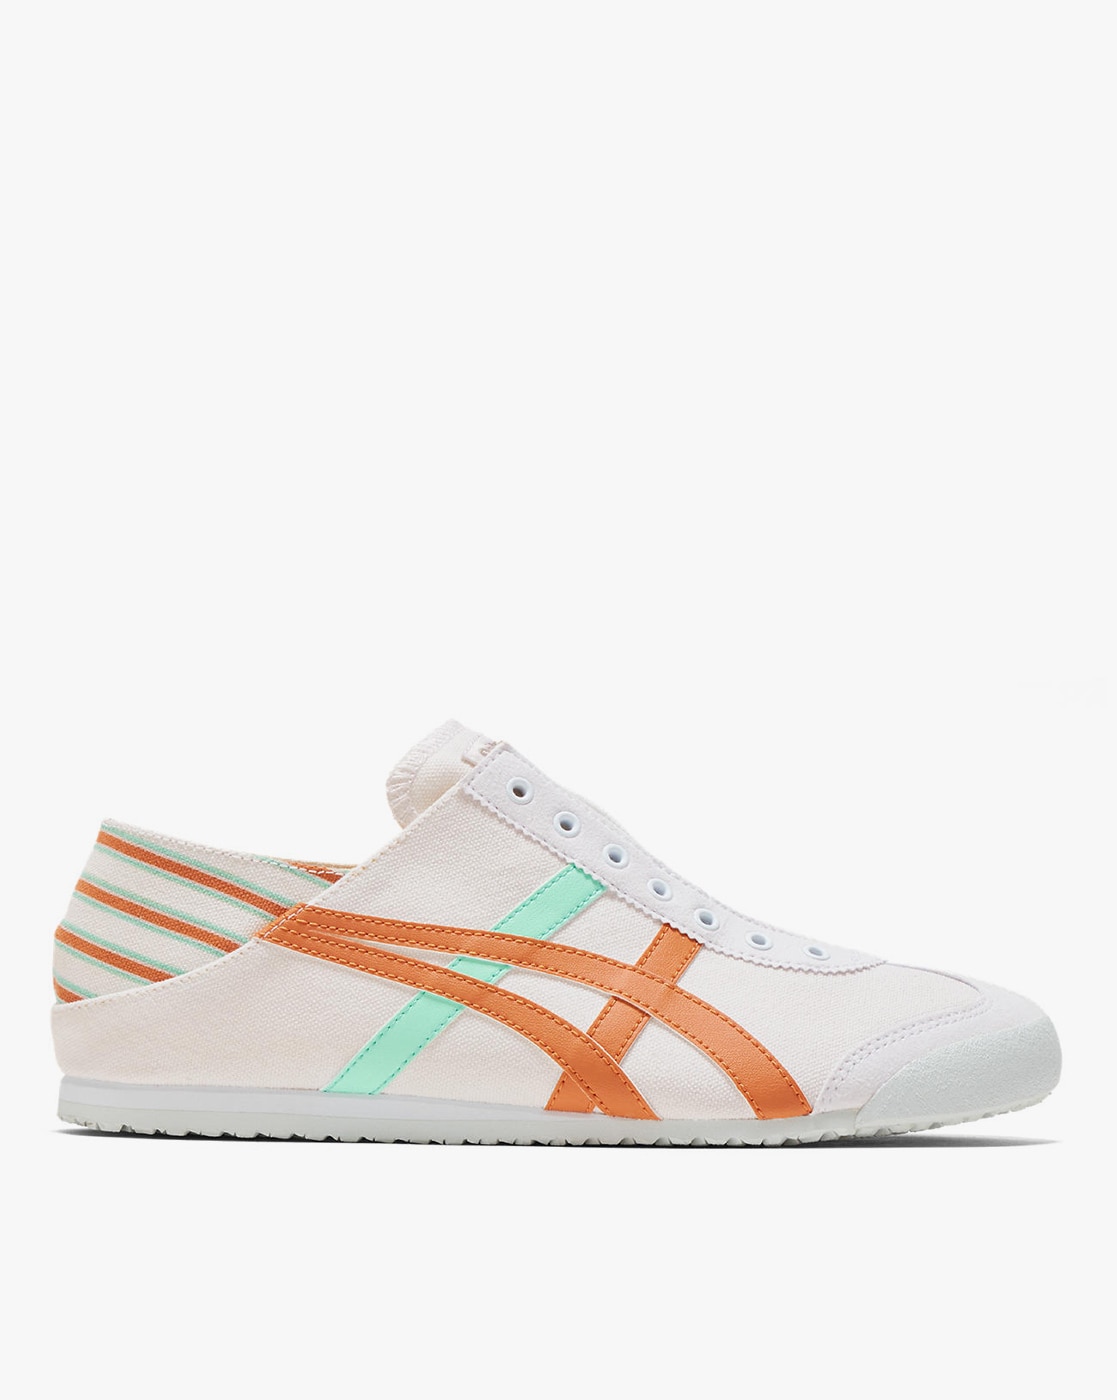 Onitsuka Tiger Mexico 66 White Slate Grey Sizes available for pre-order  (1-2 WEEKS ETA) 5.5/6/6.5/7/7.5/8 women's Price starts at… | Instagram